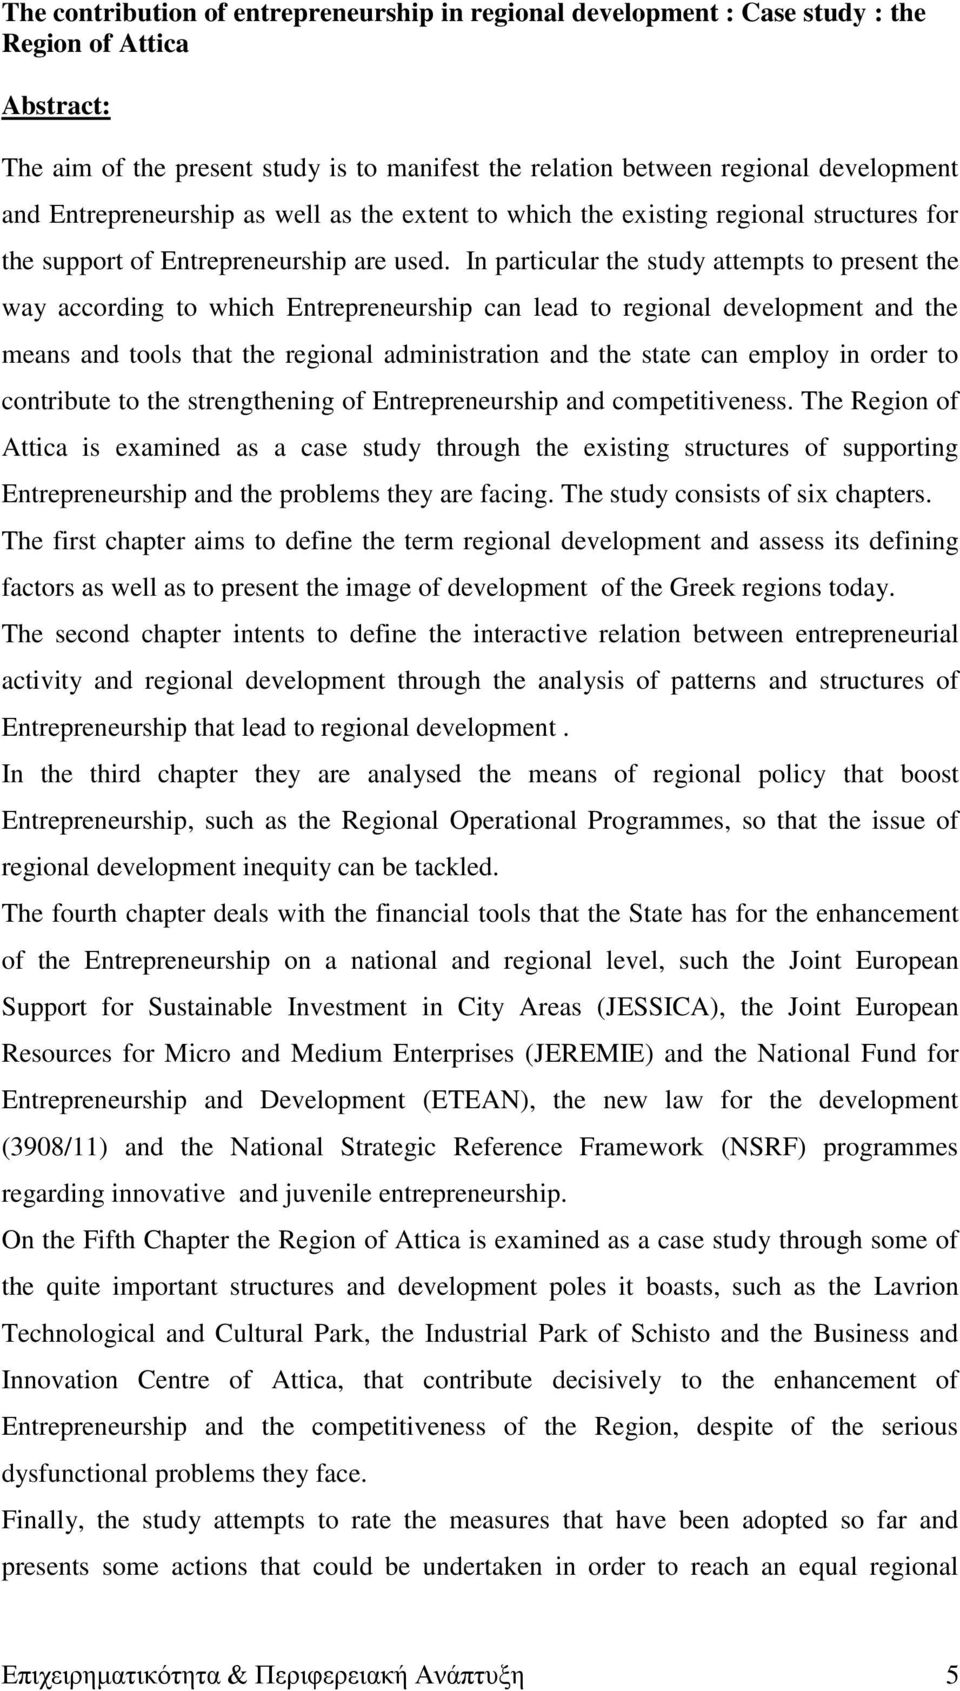 In particular the study attempts to present the way according to which Entrepreneurship can lead to regional development and the means and tools that the regional administration and the state can